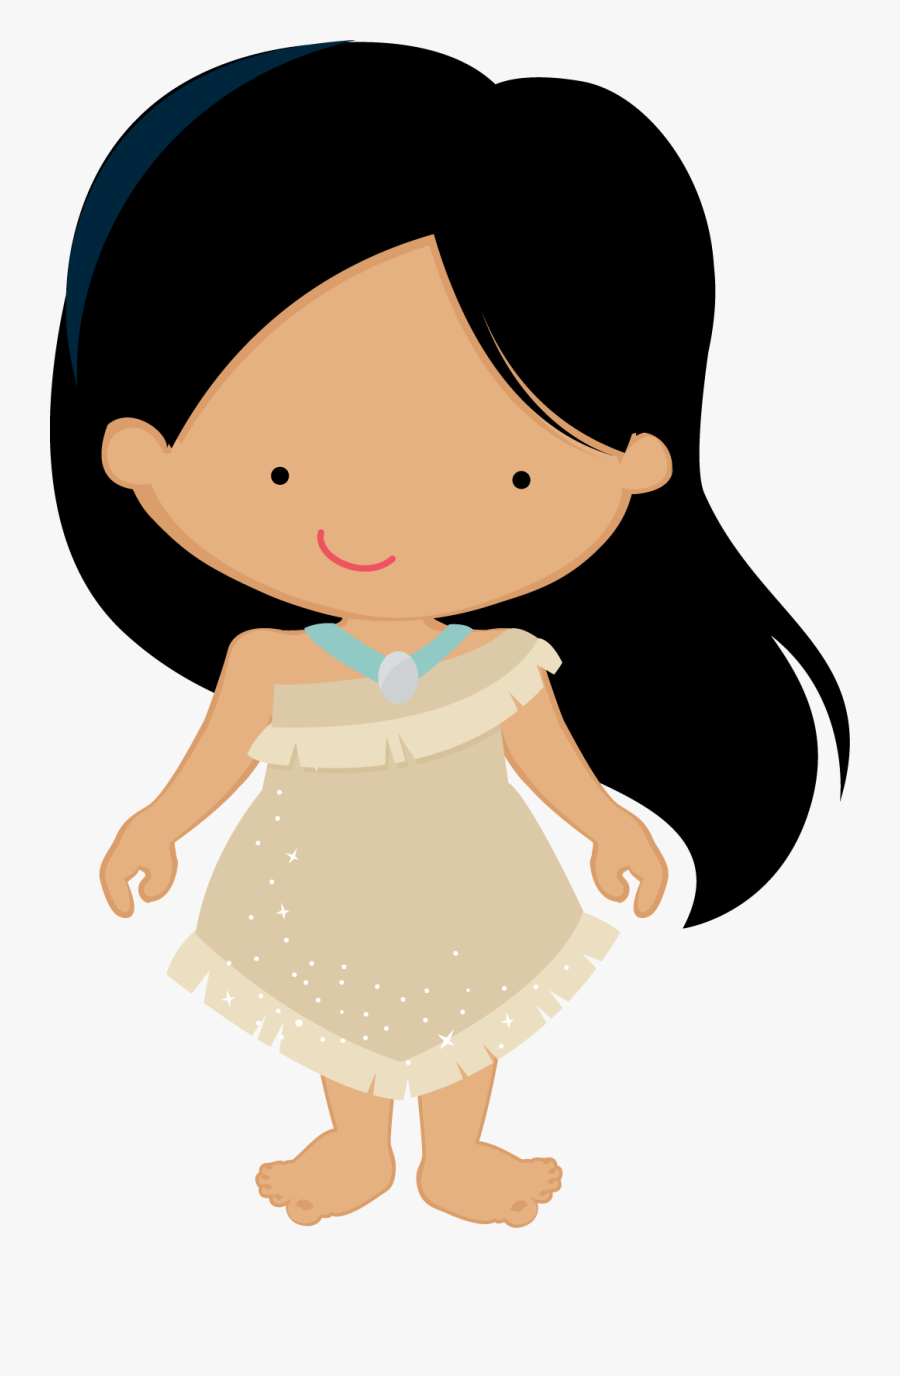 Pin By Kathy Pidcock On Dolls - Princesas Disney Cute Png, Transparent Clipart